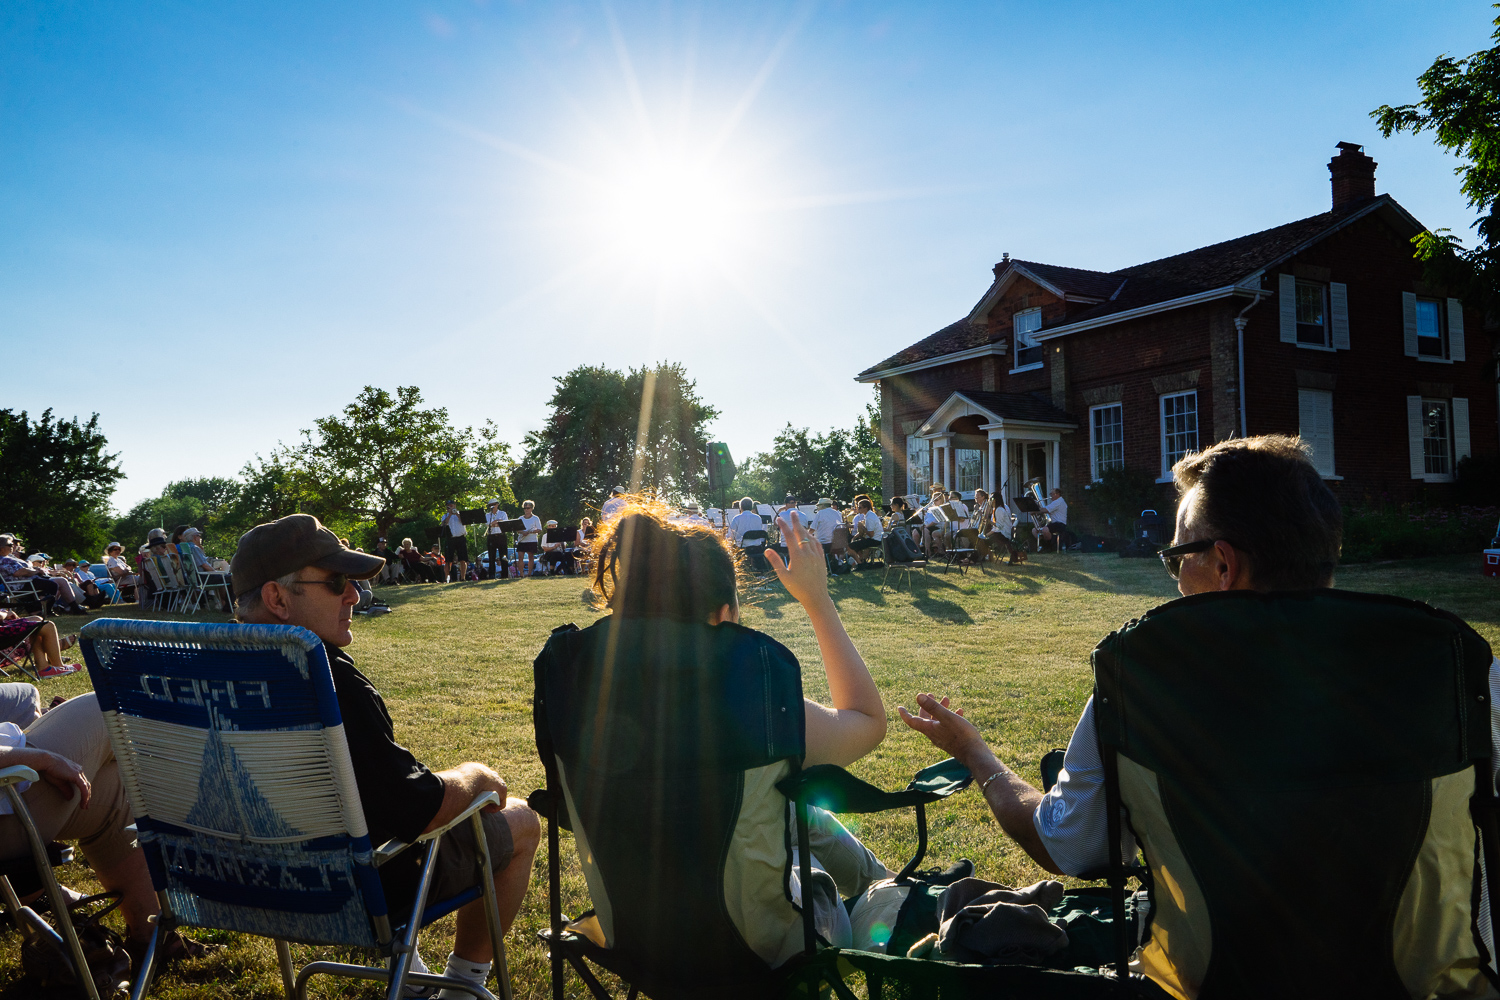 three seated audience members watch a band play in a field next to a large red brick house. The sun is shining brightly.